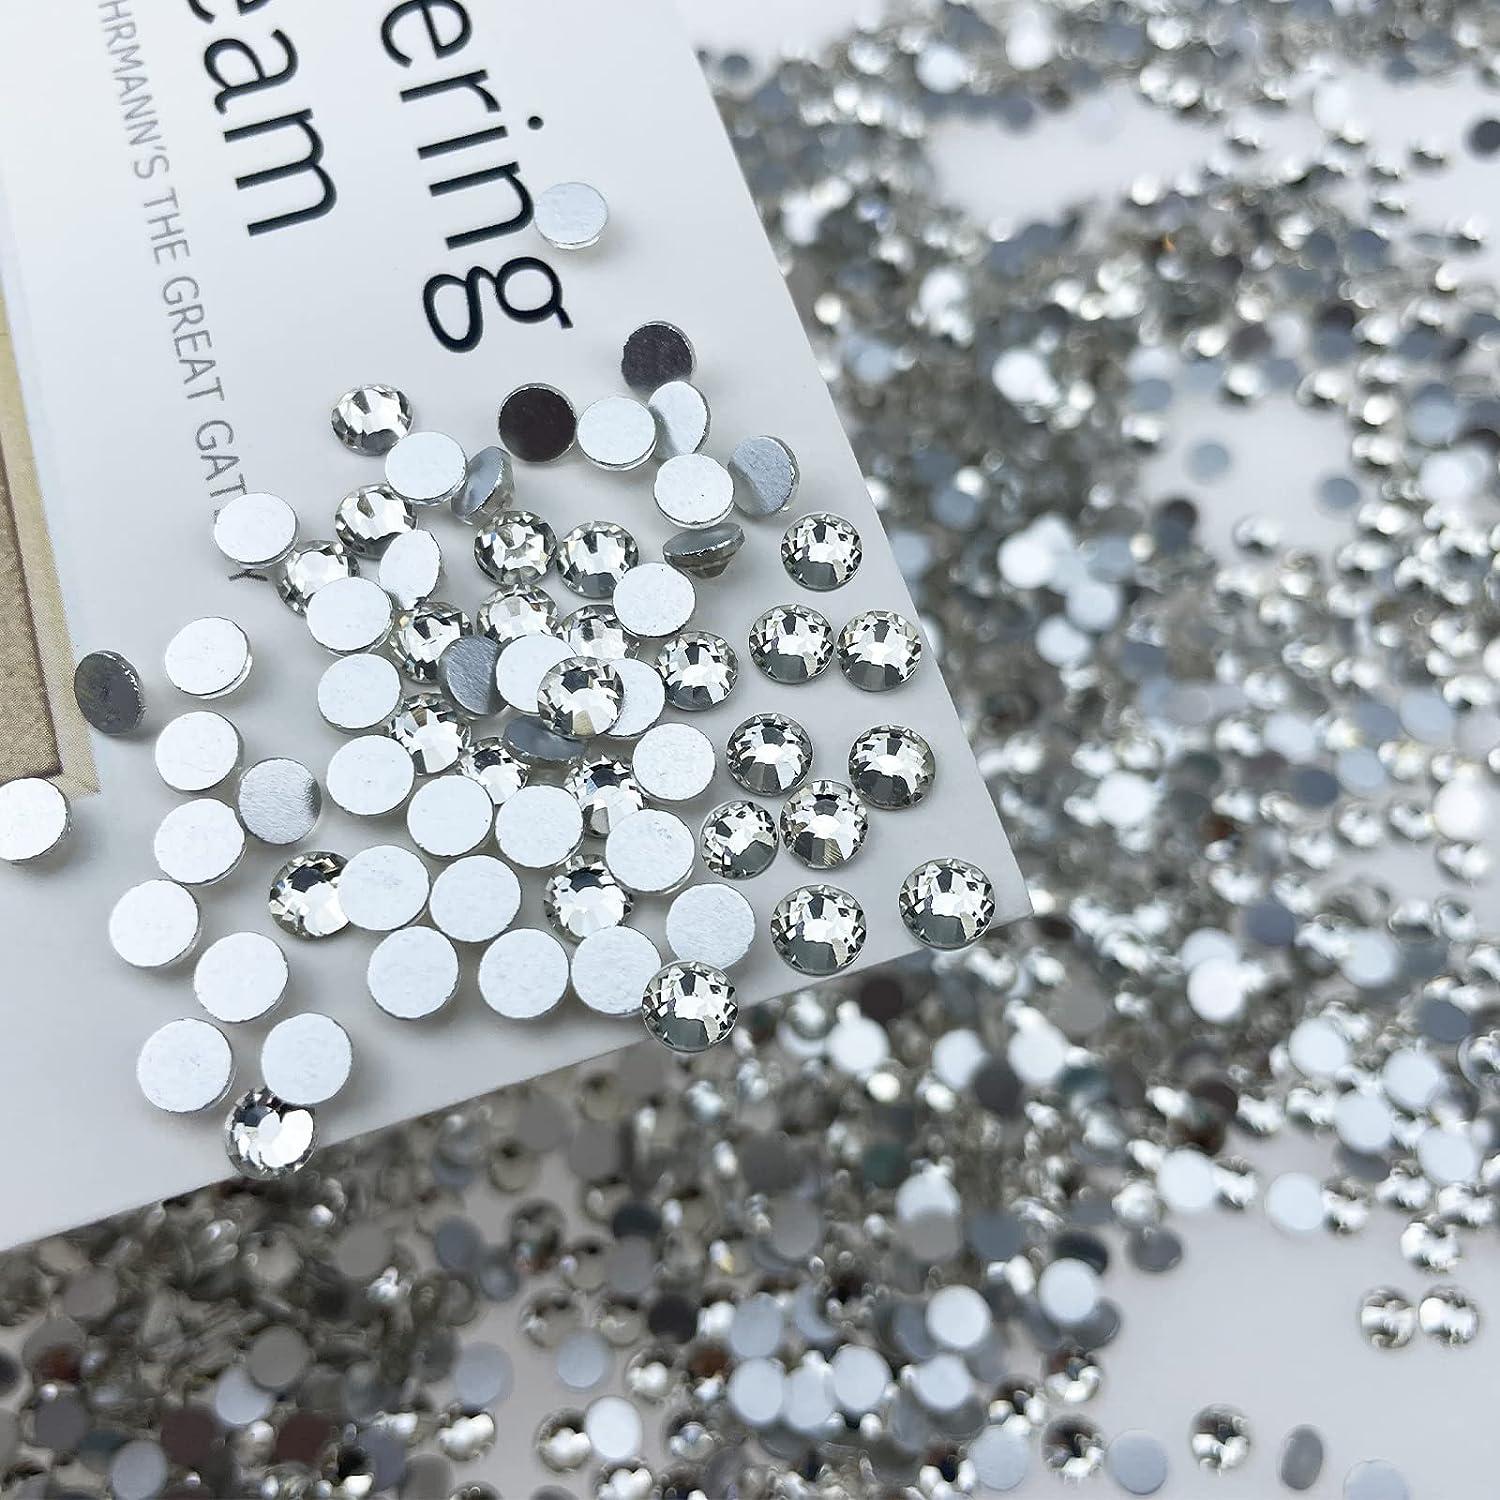 4320Pcs SS20 Flatback Rhinestones for Crafts Bulk Clear-Crystals White  Craft Gems Jewels Glass Diamonds Stone 5mm-Silver Gems for Nails Dance  Costumes Clothes Shoes Tumblers DIY Wholesale HINABTRU Crystal Clear  Clear-Sto